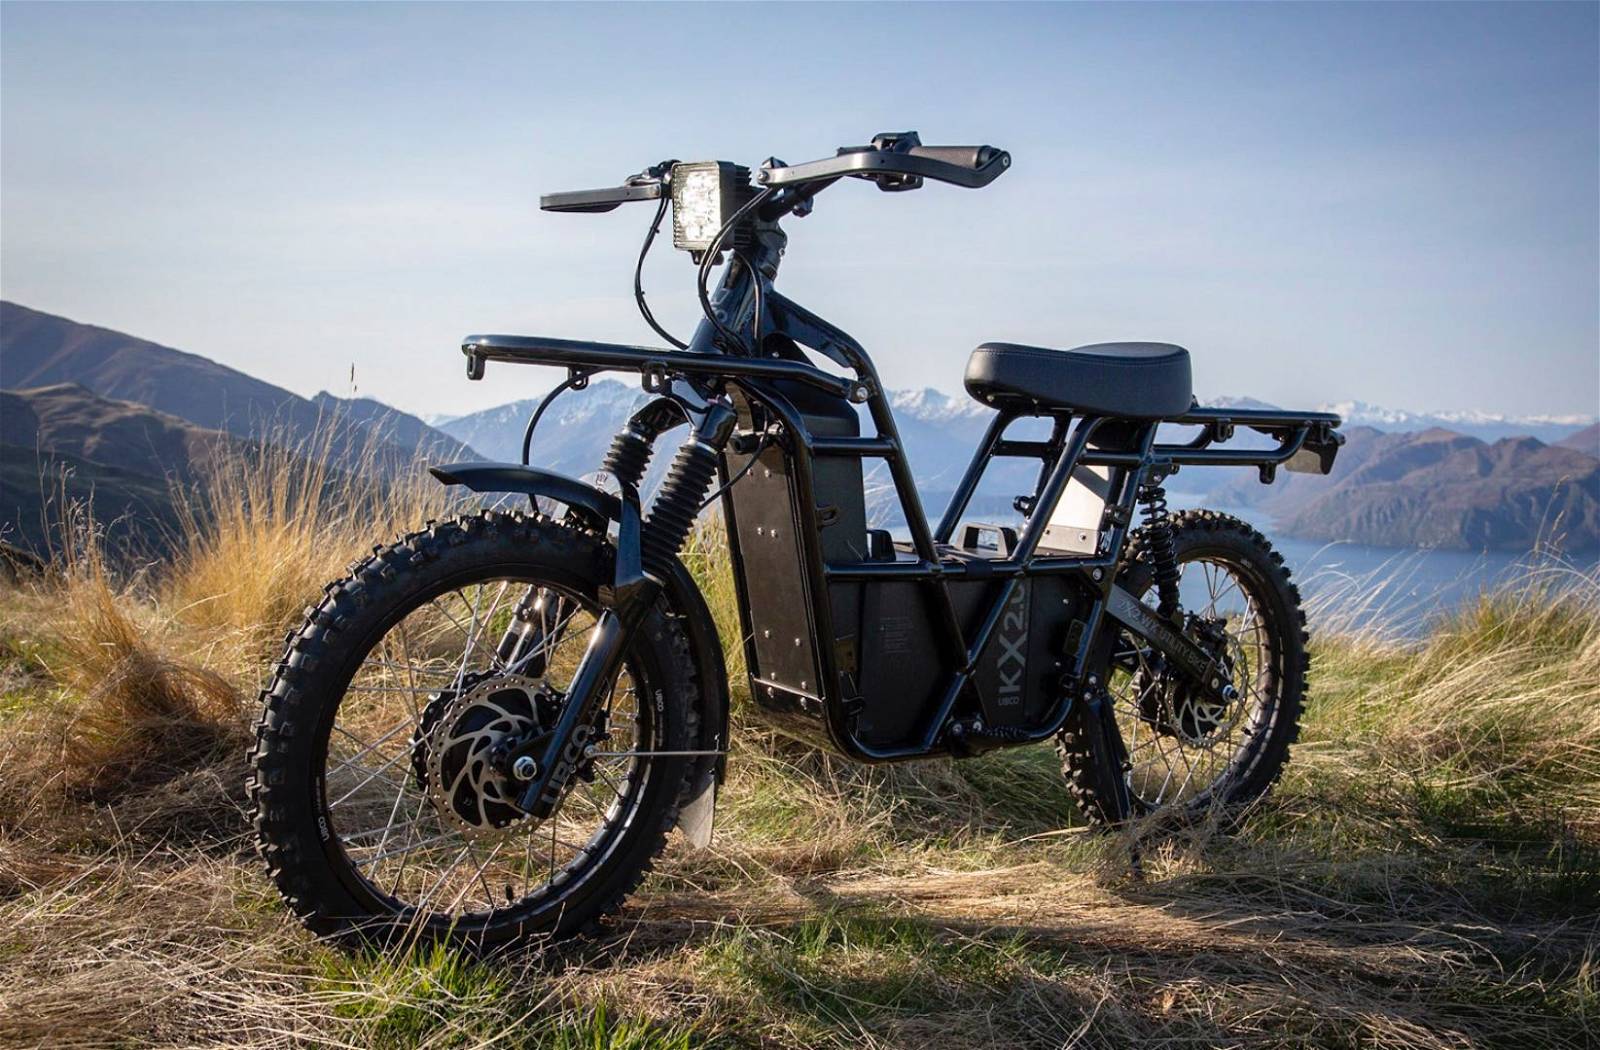 UBCO 2x2 Electric Bike Overview [Top 7 Features for Hunting]